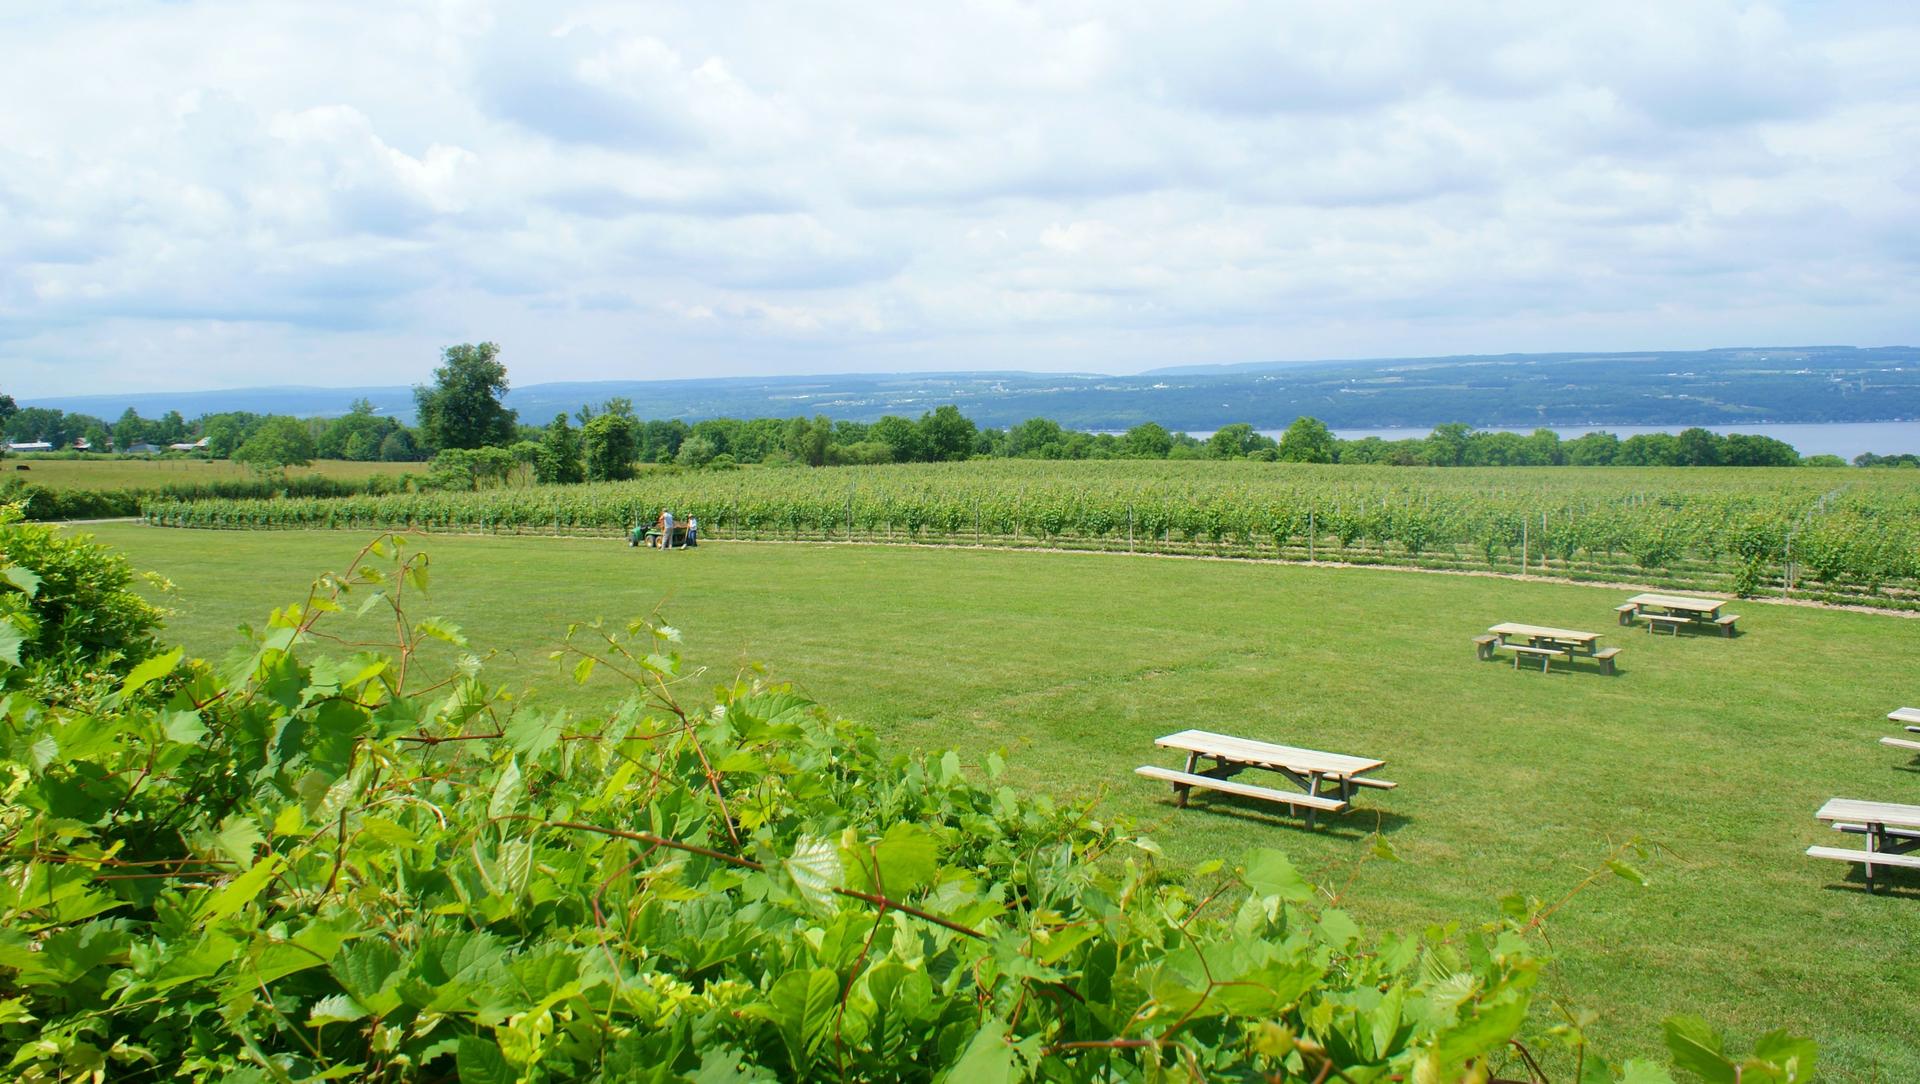 This is a view of vineyards on Seneca Lake in New York.